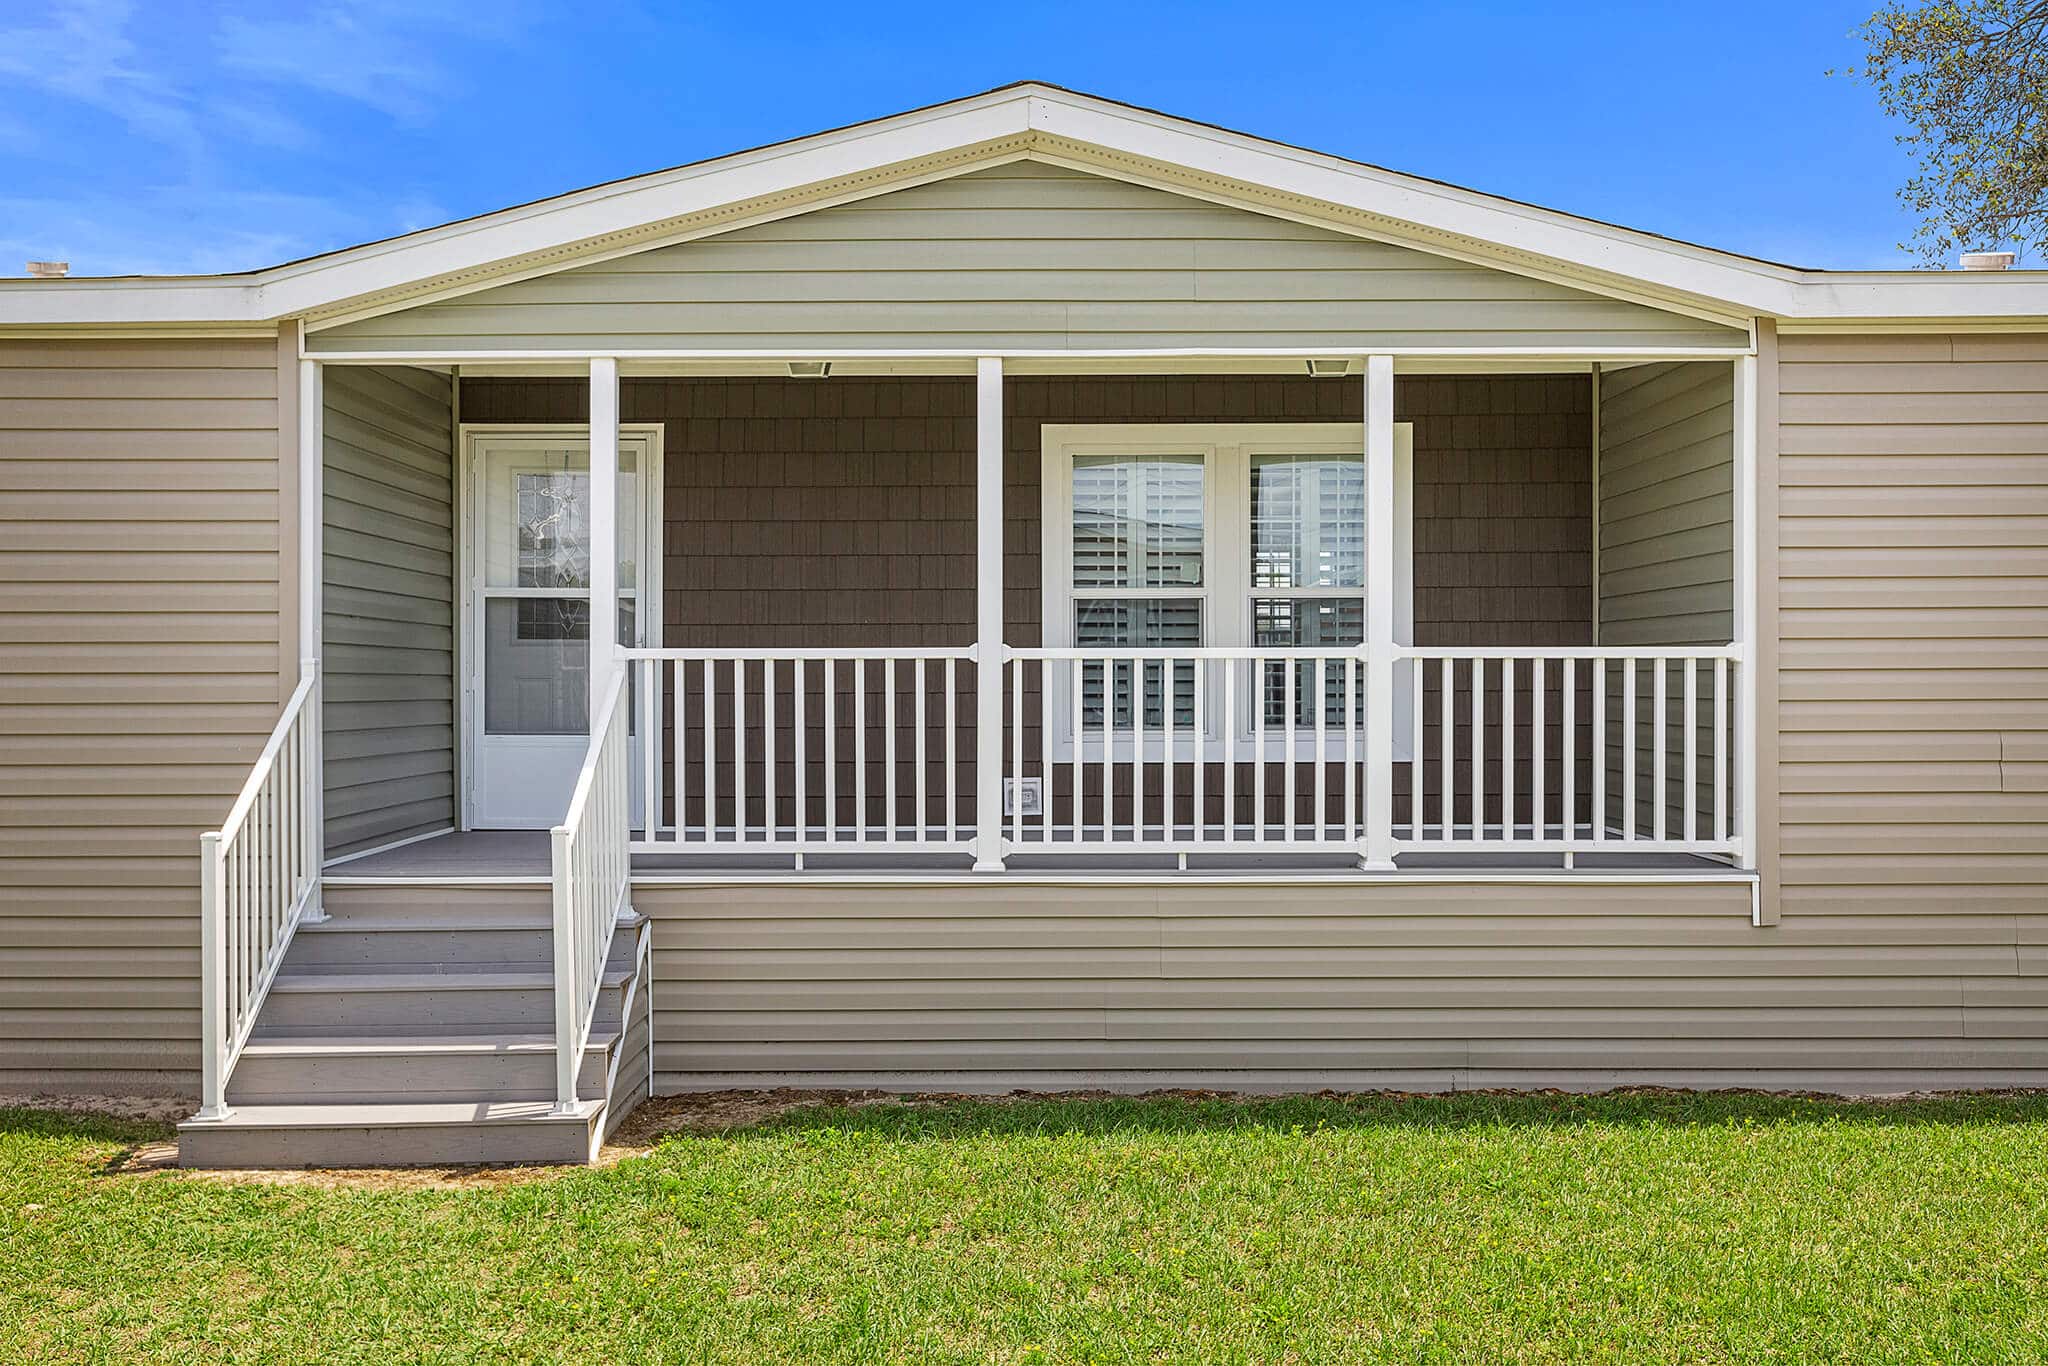 Are Manufactured Houses a Good Investment?